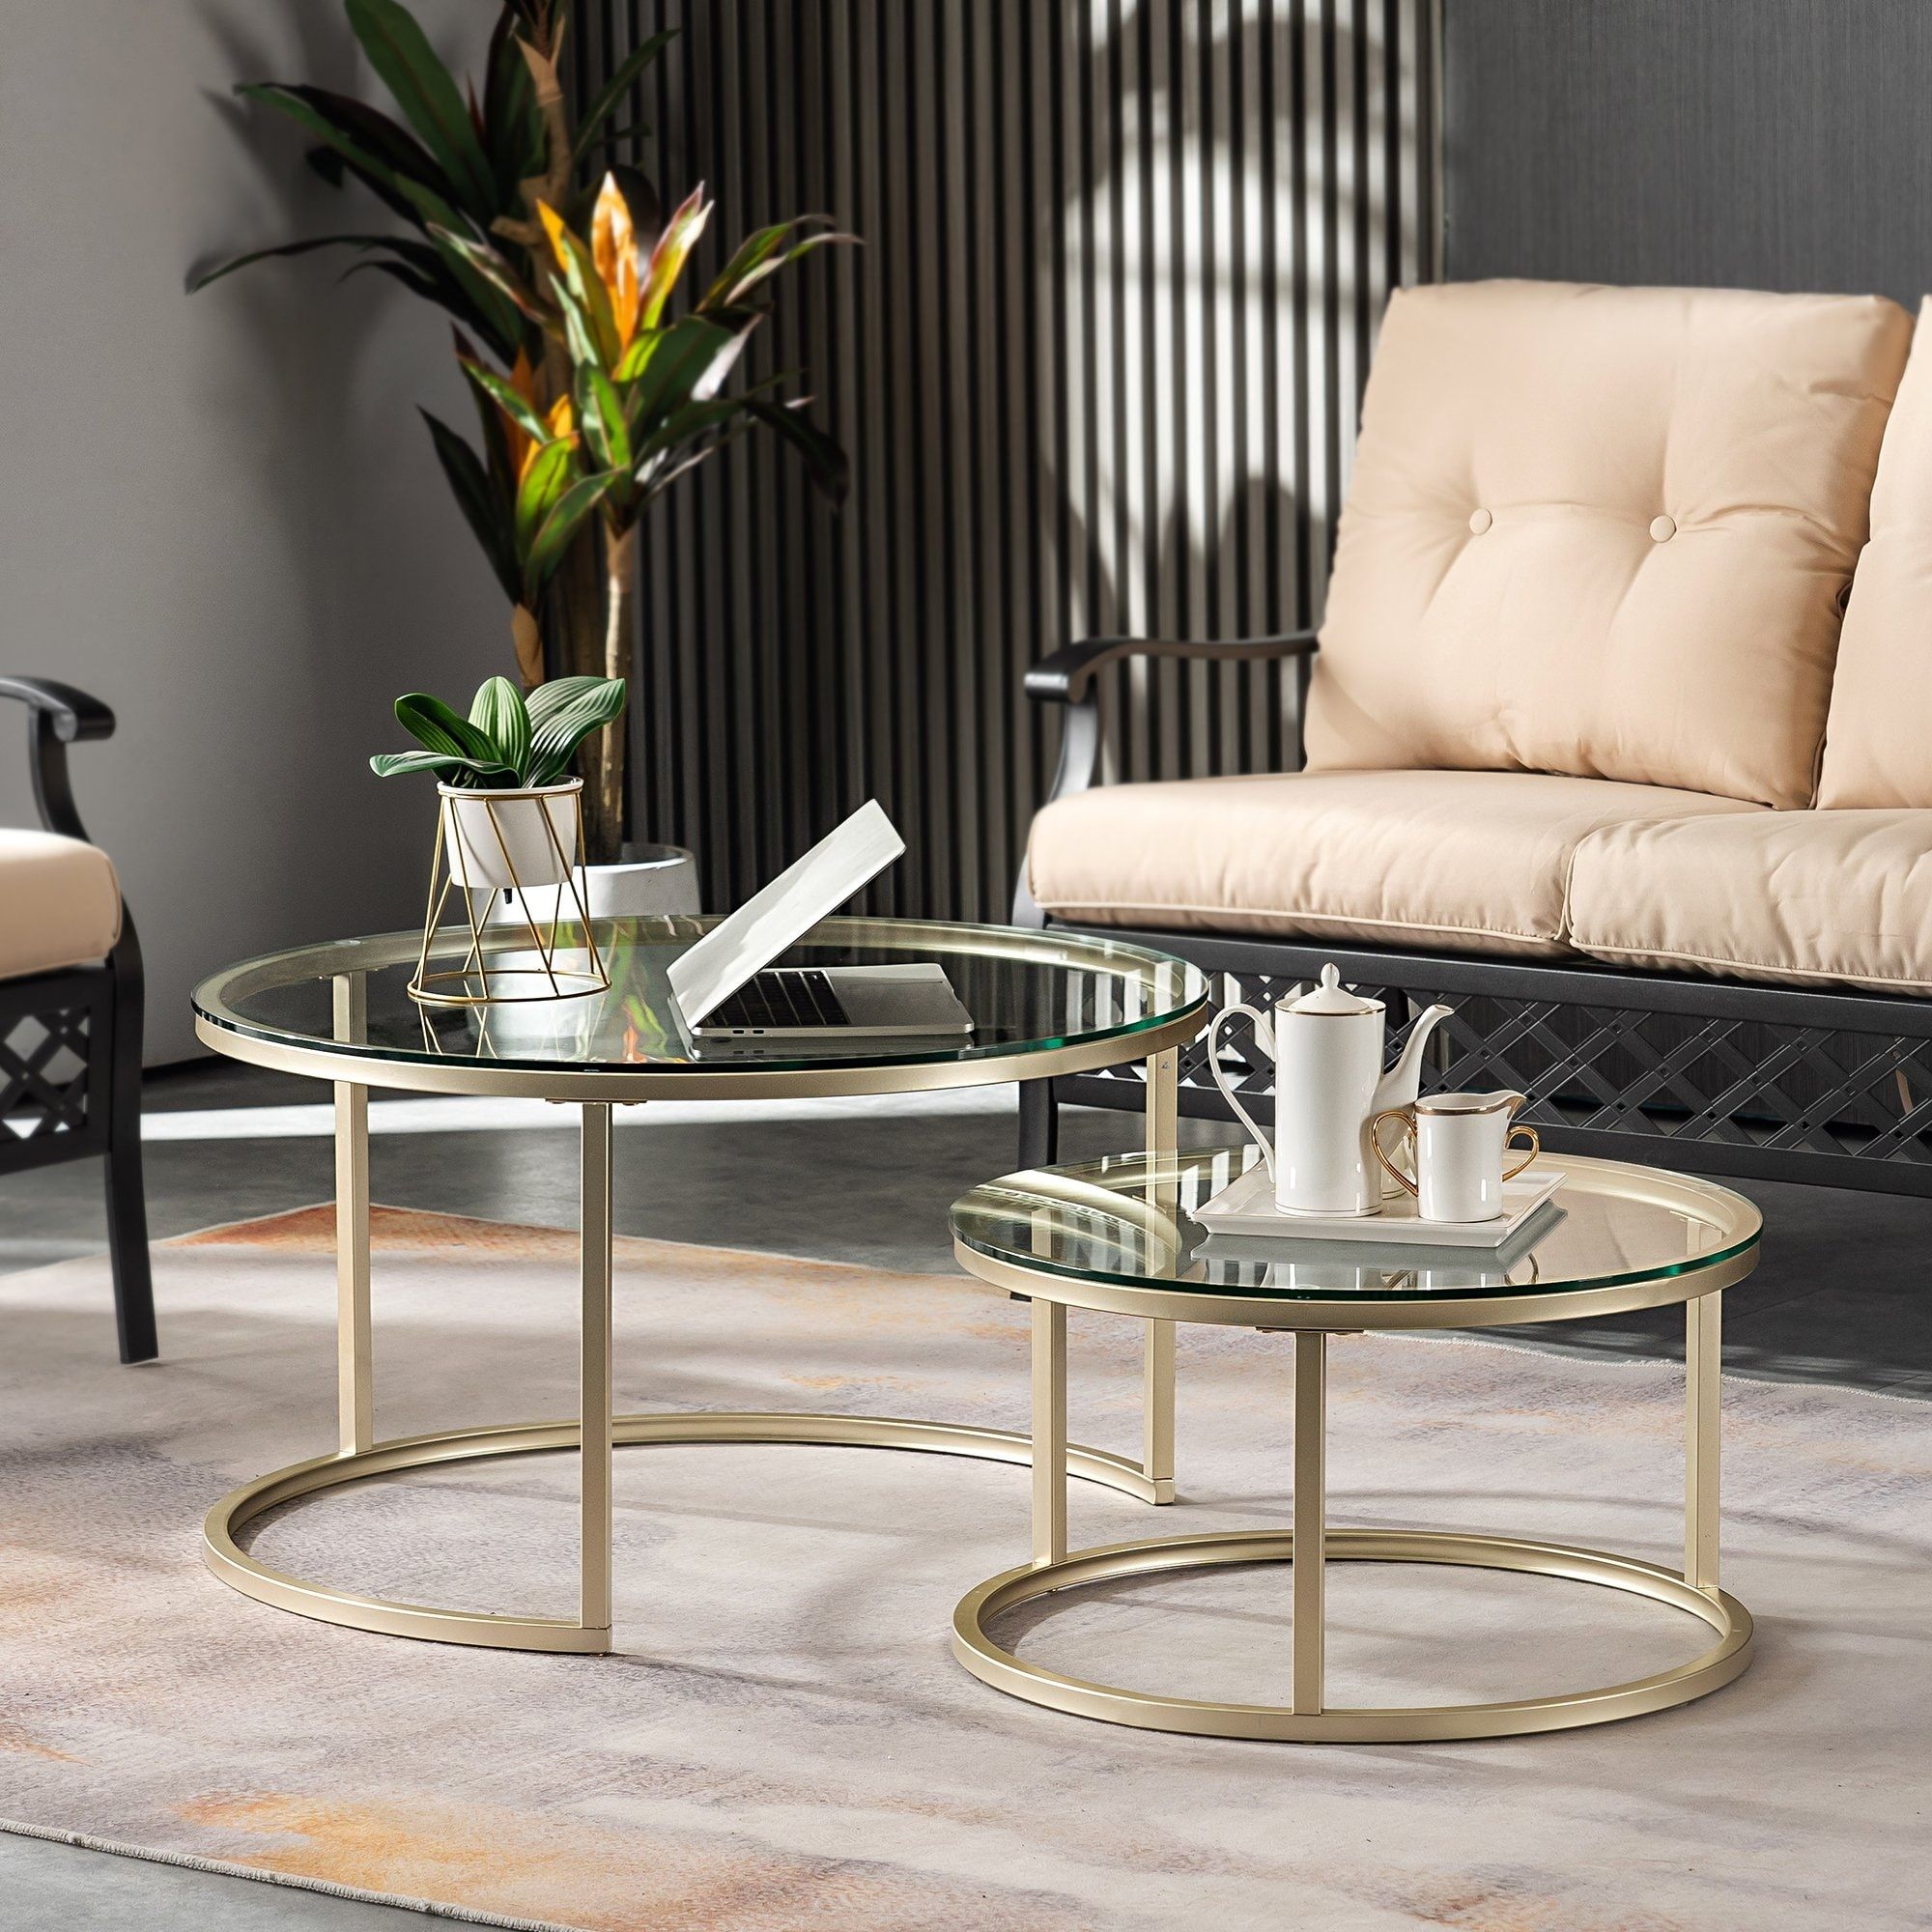 Ivinta Round Nesting Coffee Table Set Of 2, Modern Glass Coffee Tables For  Living Room, Accent Clear Gold Side Tables Set – On Sale – Bed Bath &  Beyond – 33878289 In Nesting Coffee Tables (Photo 11 of 15)